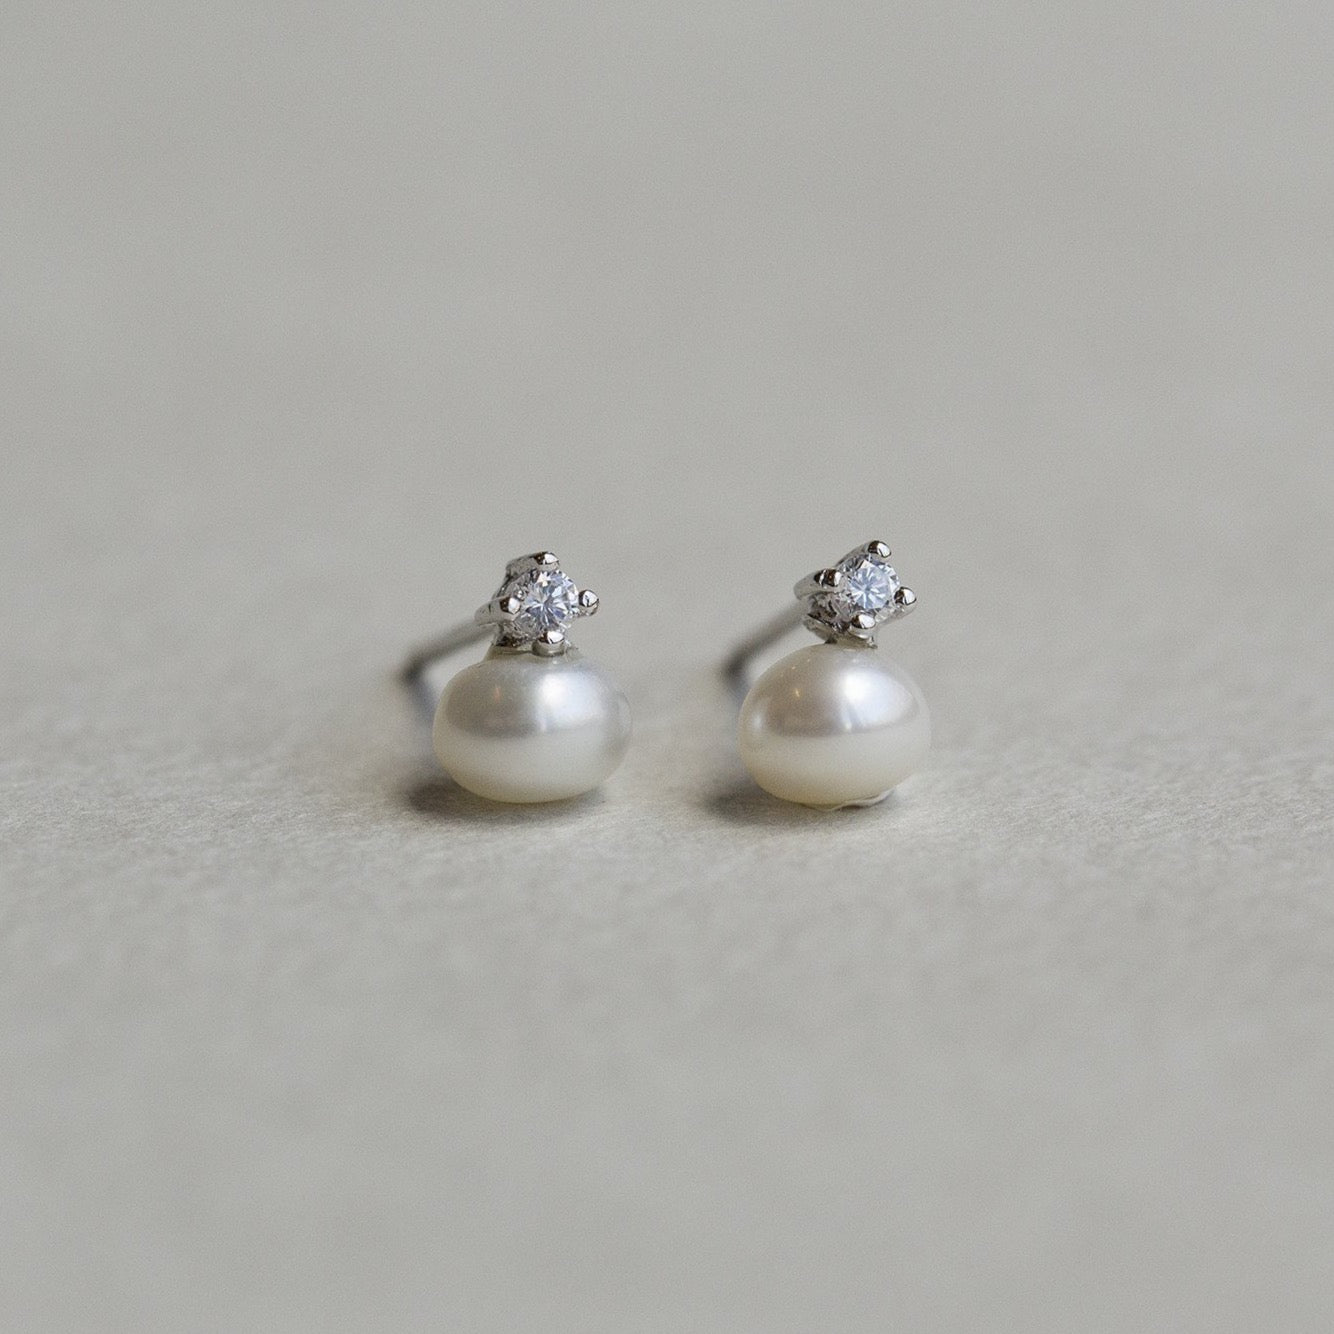 wonderful freshwater pearls with cubic zirconia 'crown'